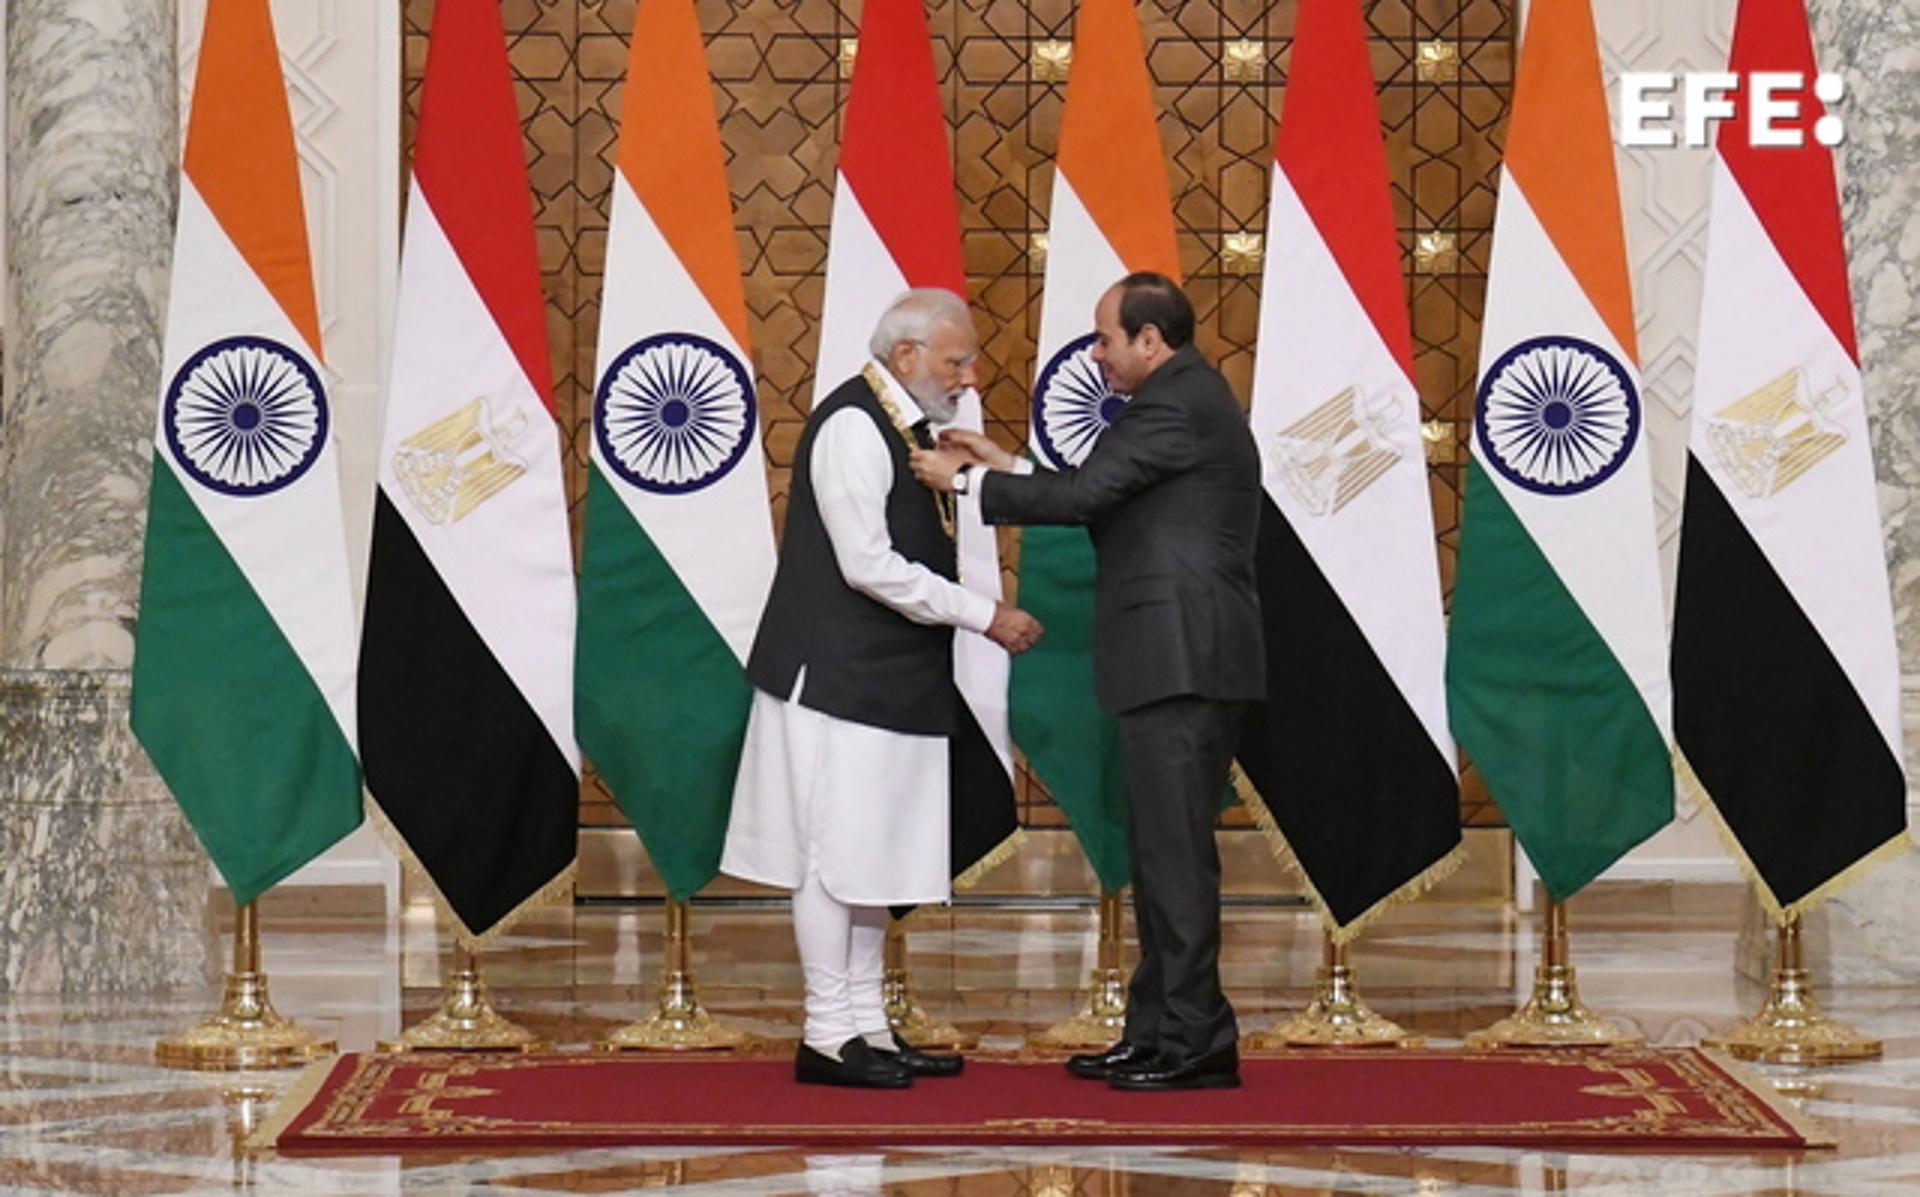 A handout photo made available by Egyptian presidential office shows Egyptian President Abdul Fattah al-Sisi (R) conferring Indian Prime Minister Narendra Modi with the 'Order of the Nile' award, in Cairo, Egypt, 25 June 2023. EFE-EPA/EGYPTIAN PRESIDENTIAL OFFICE HANDOUT HANDOUT EDITORIAL USE ONLY/NO SALES
